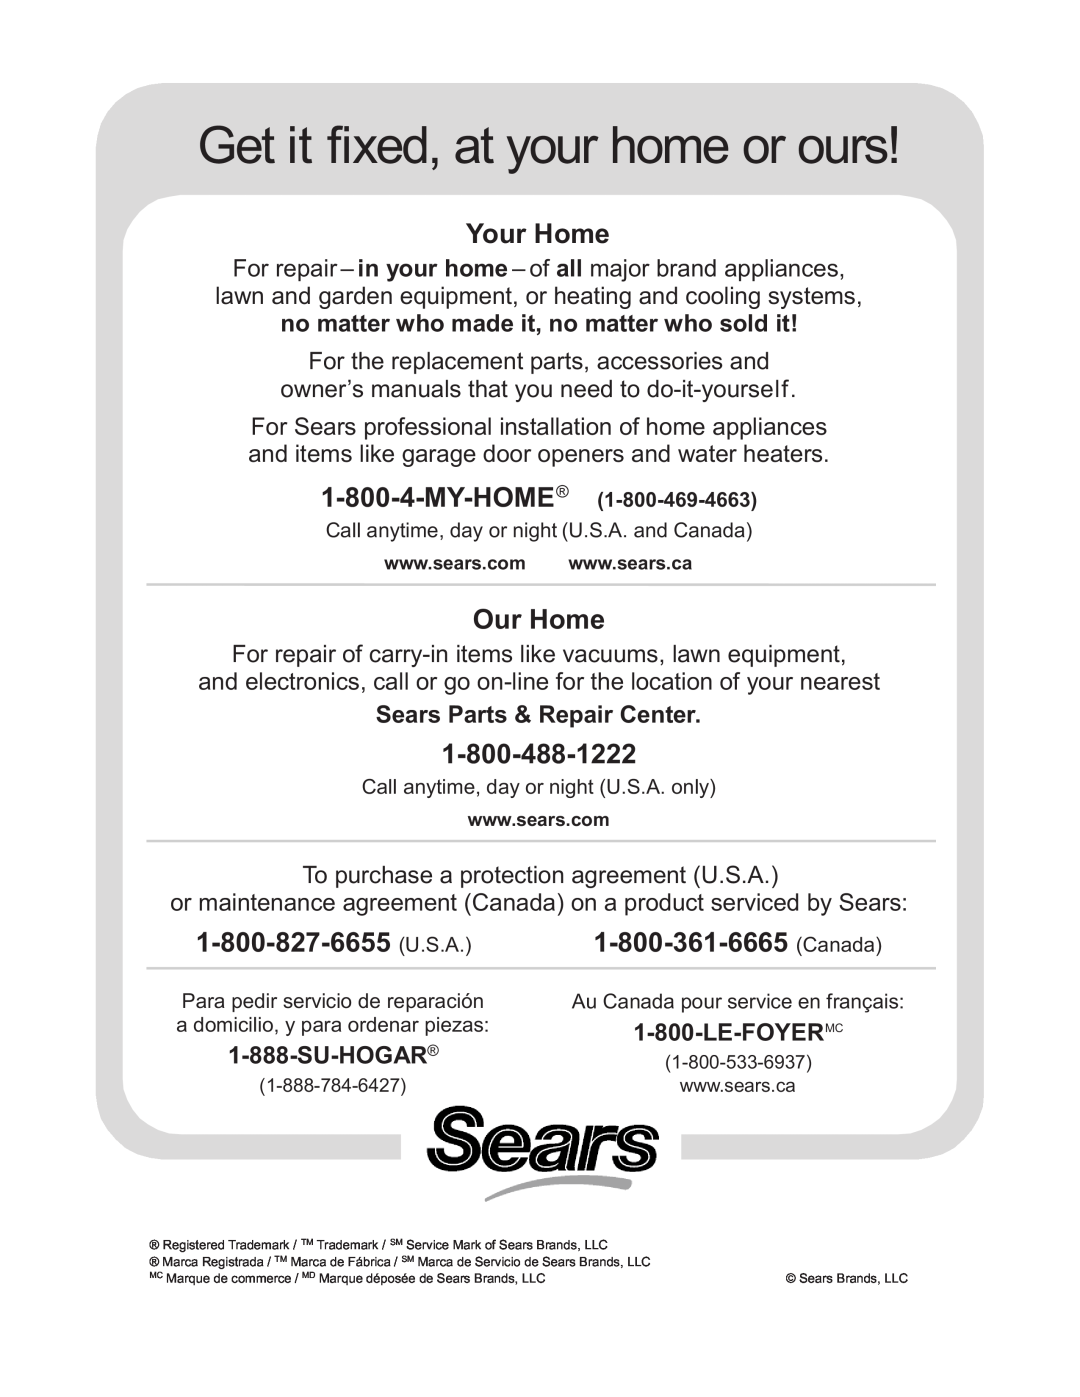 Sears P12L0051 Get it fixed, at your home or ours, Your Home, Our Home, Sears Parts & Repair Center, Su-Hogar, Le-Foyermc 